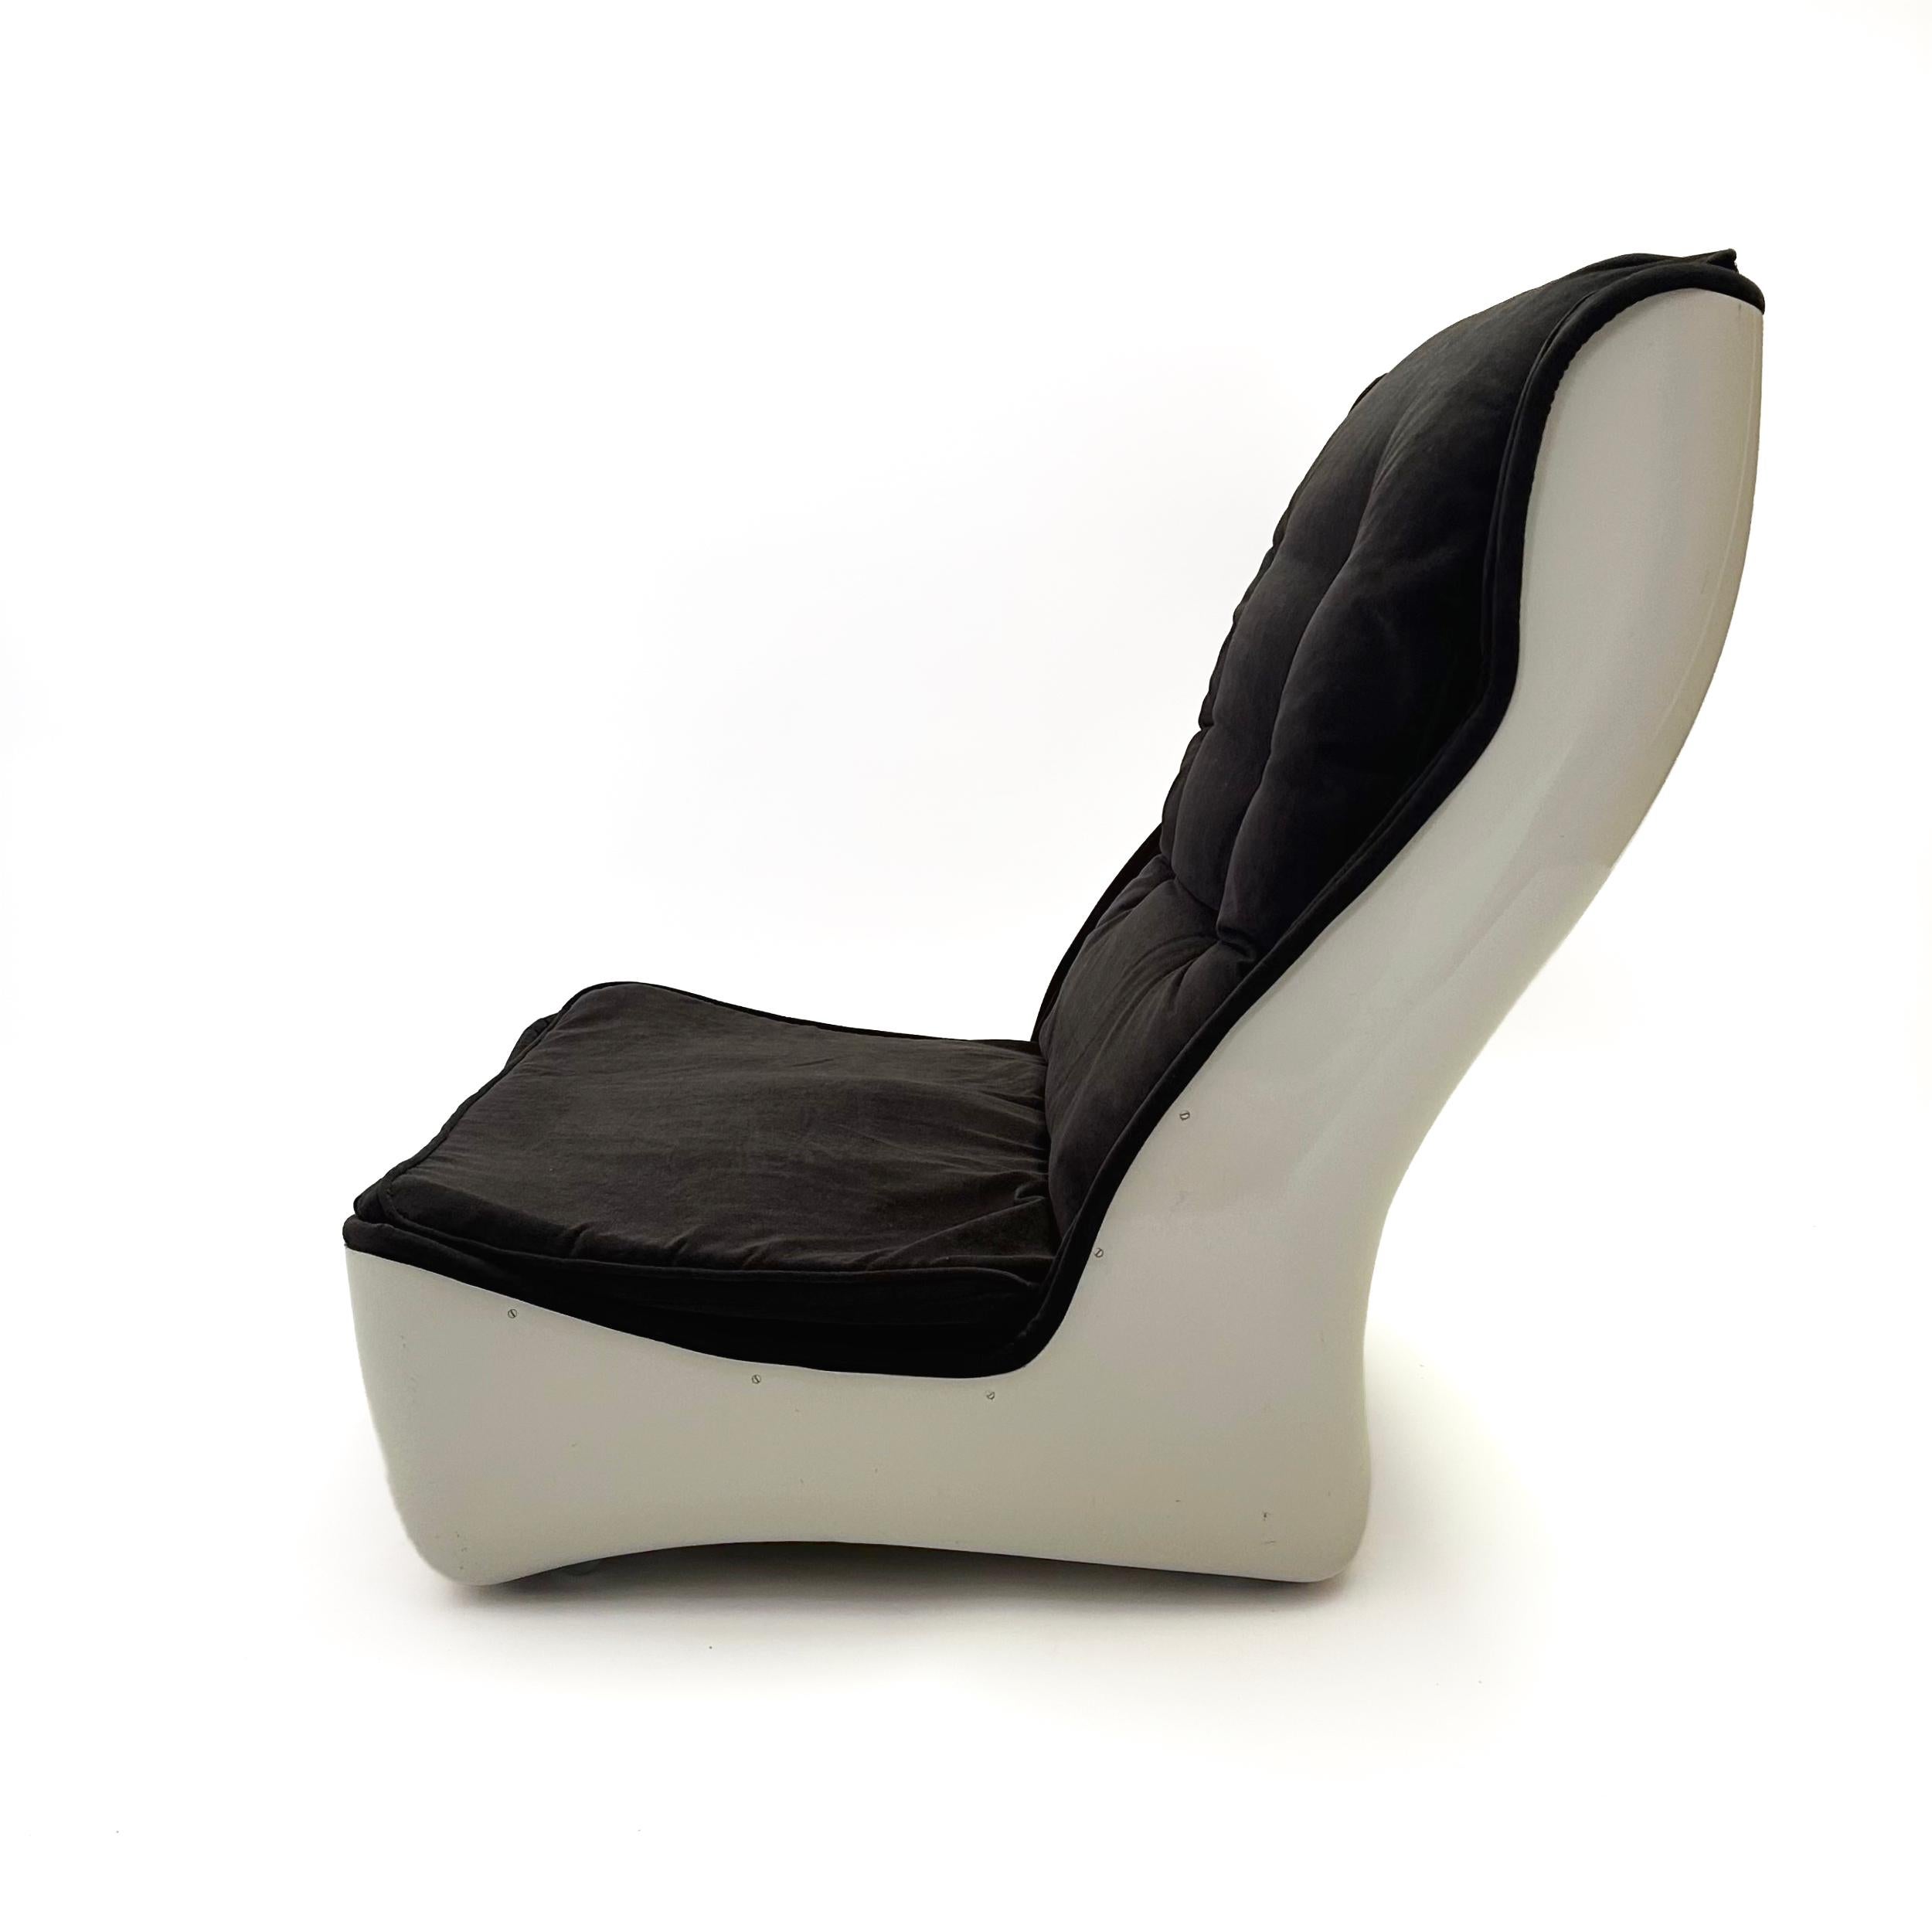 20th Century “Orchidée” Lounge Chair By Michel Cadestin For Airborne, France, 1968 For Sale